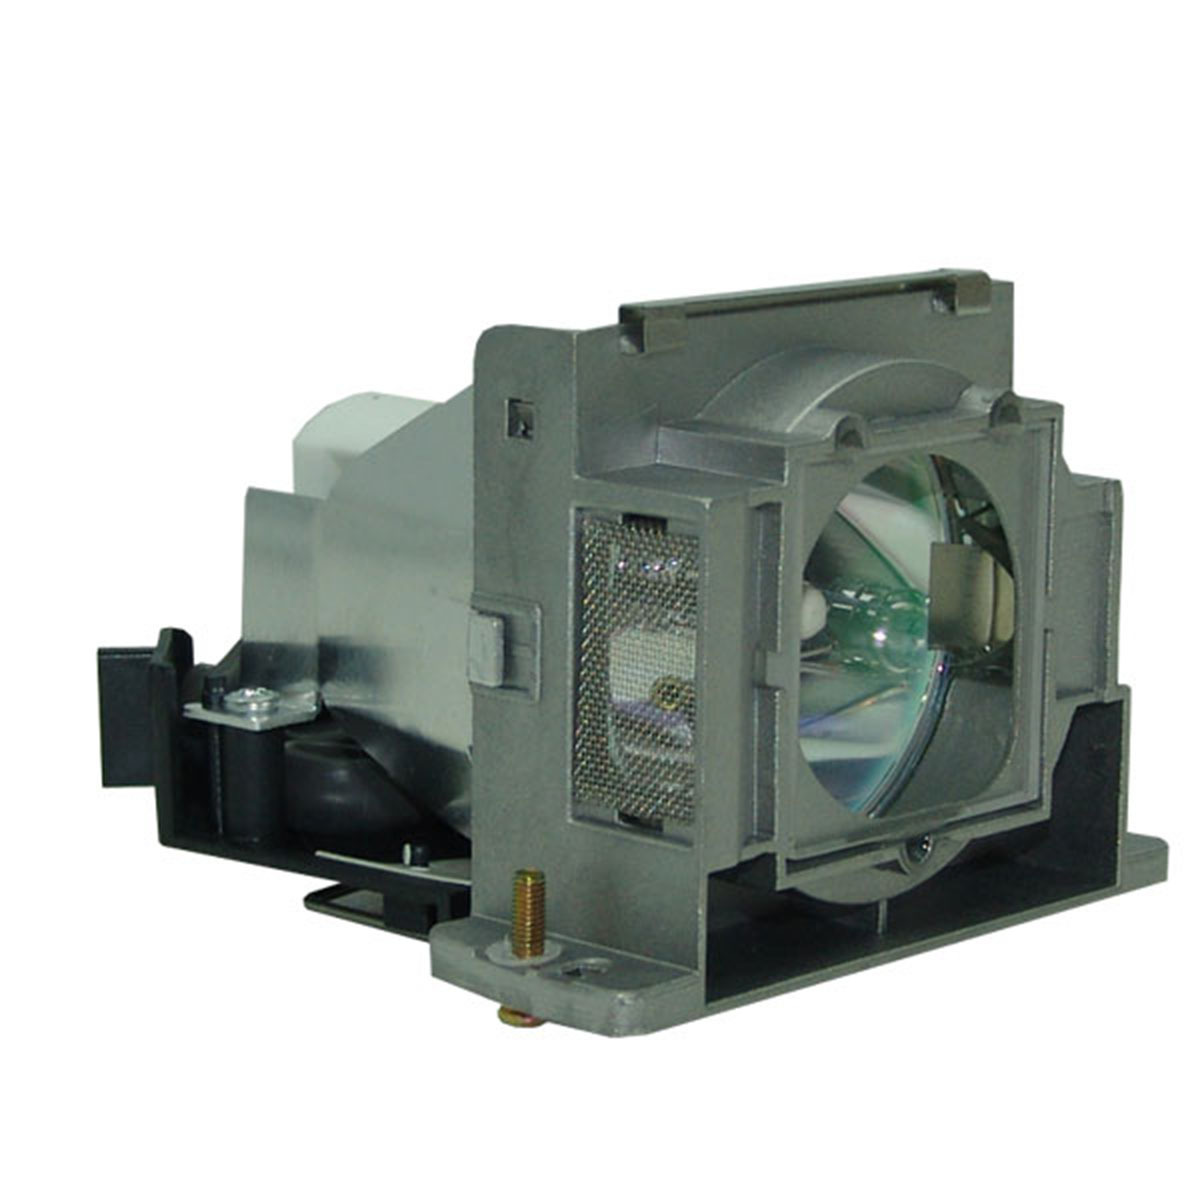 Primary image for Mitsubishi VLT-XD400LP Compatible Projector Lamp Module